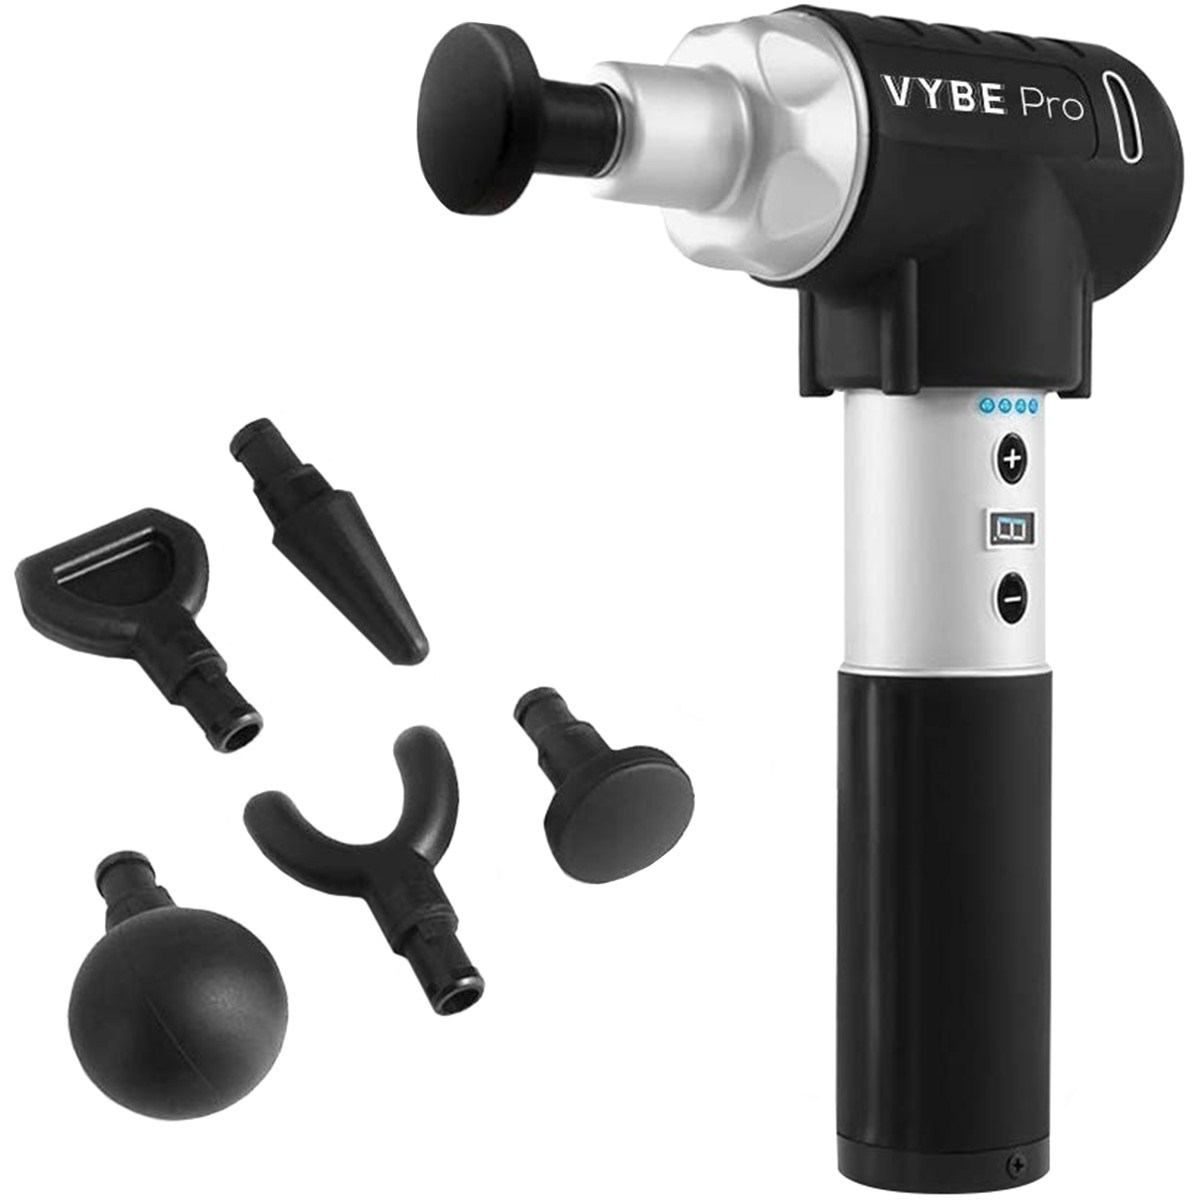 VYBE Pro Personal Percussion Handheld Deep Muscle Massage Gun by Exerscribe - image 1 of 3